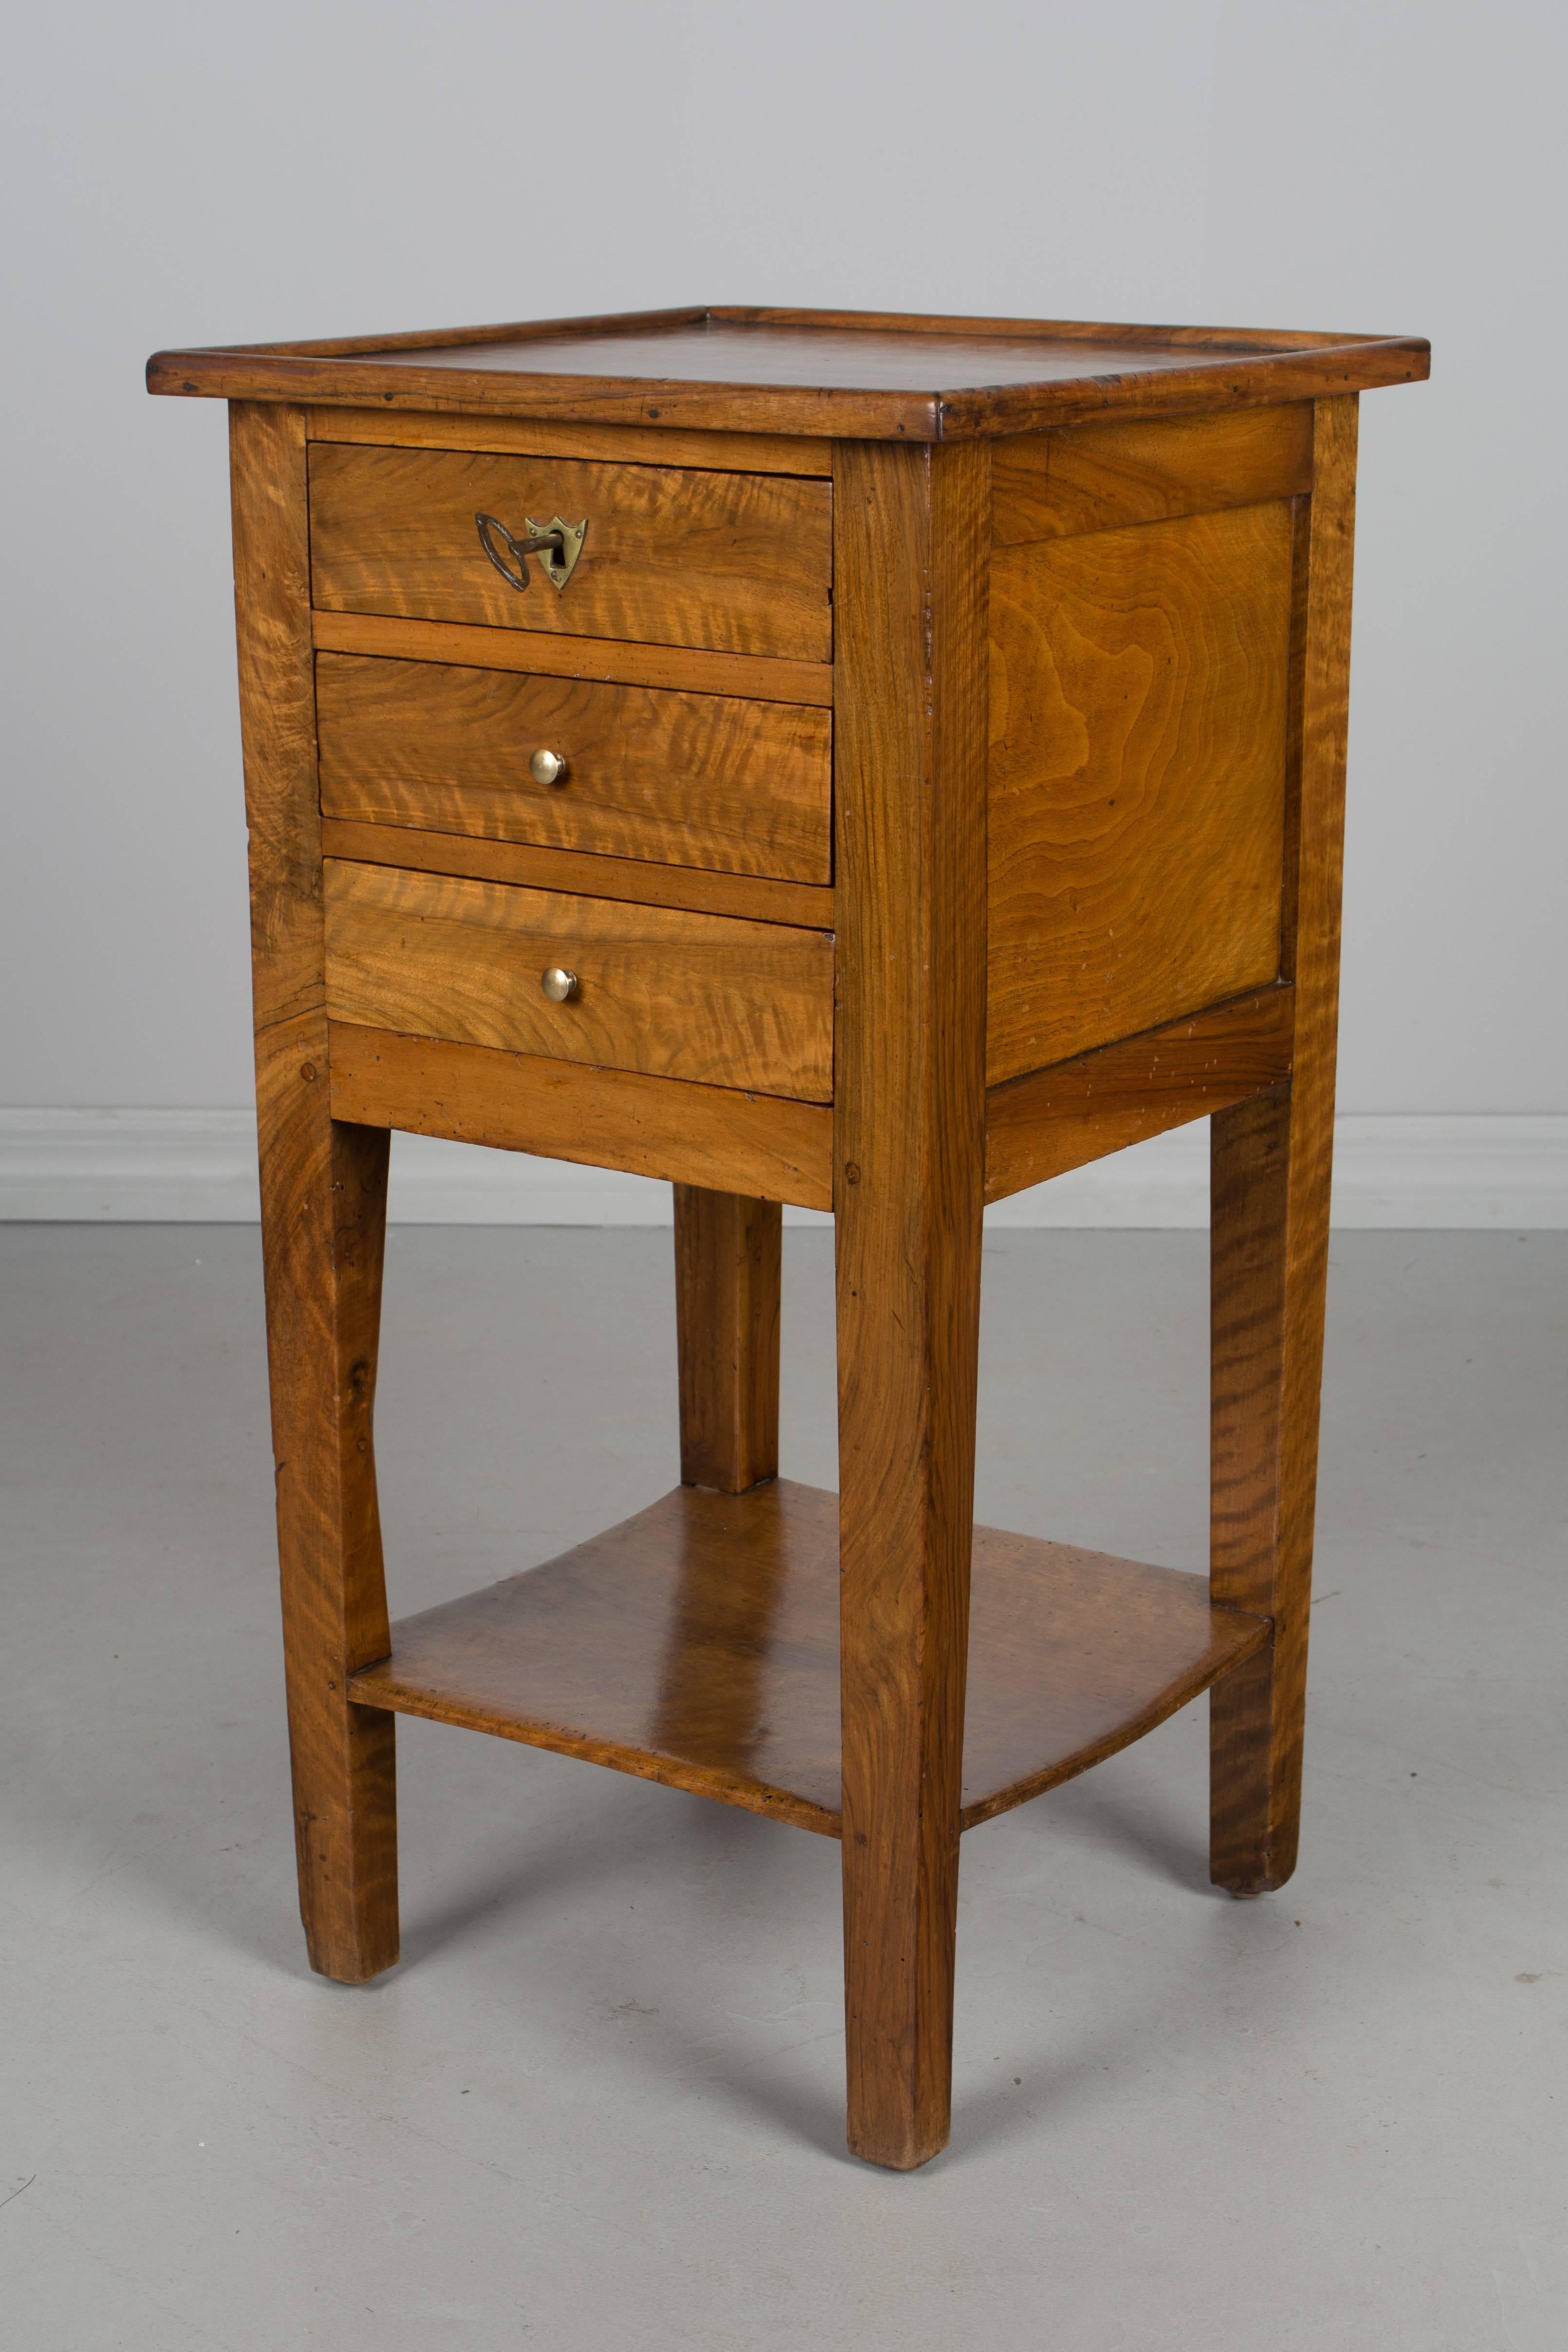 A Country French side table made of solid walnut and finished on all four sides. Beautiful wood grain with large knot on the back. Waxed finish. Three dovetailed drawers with working lock and key. (Key is not original) 
More photos available upon